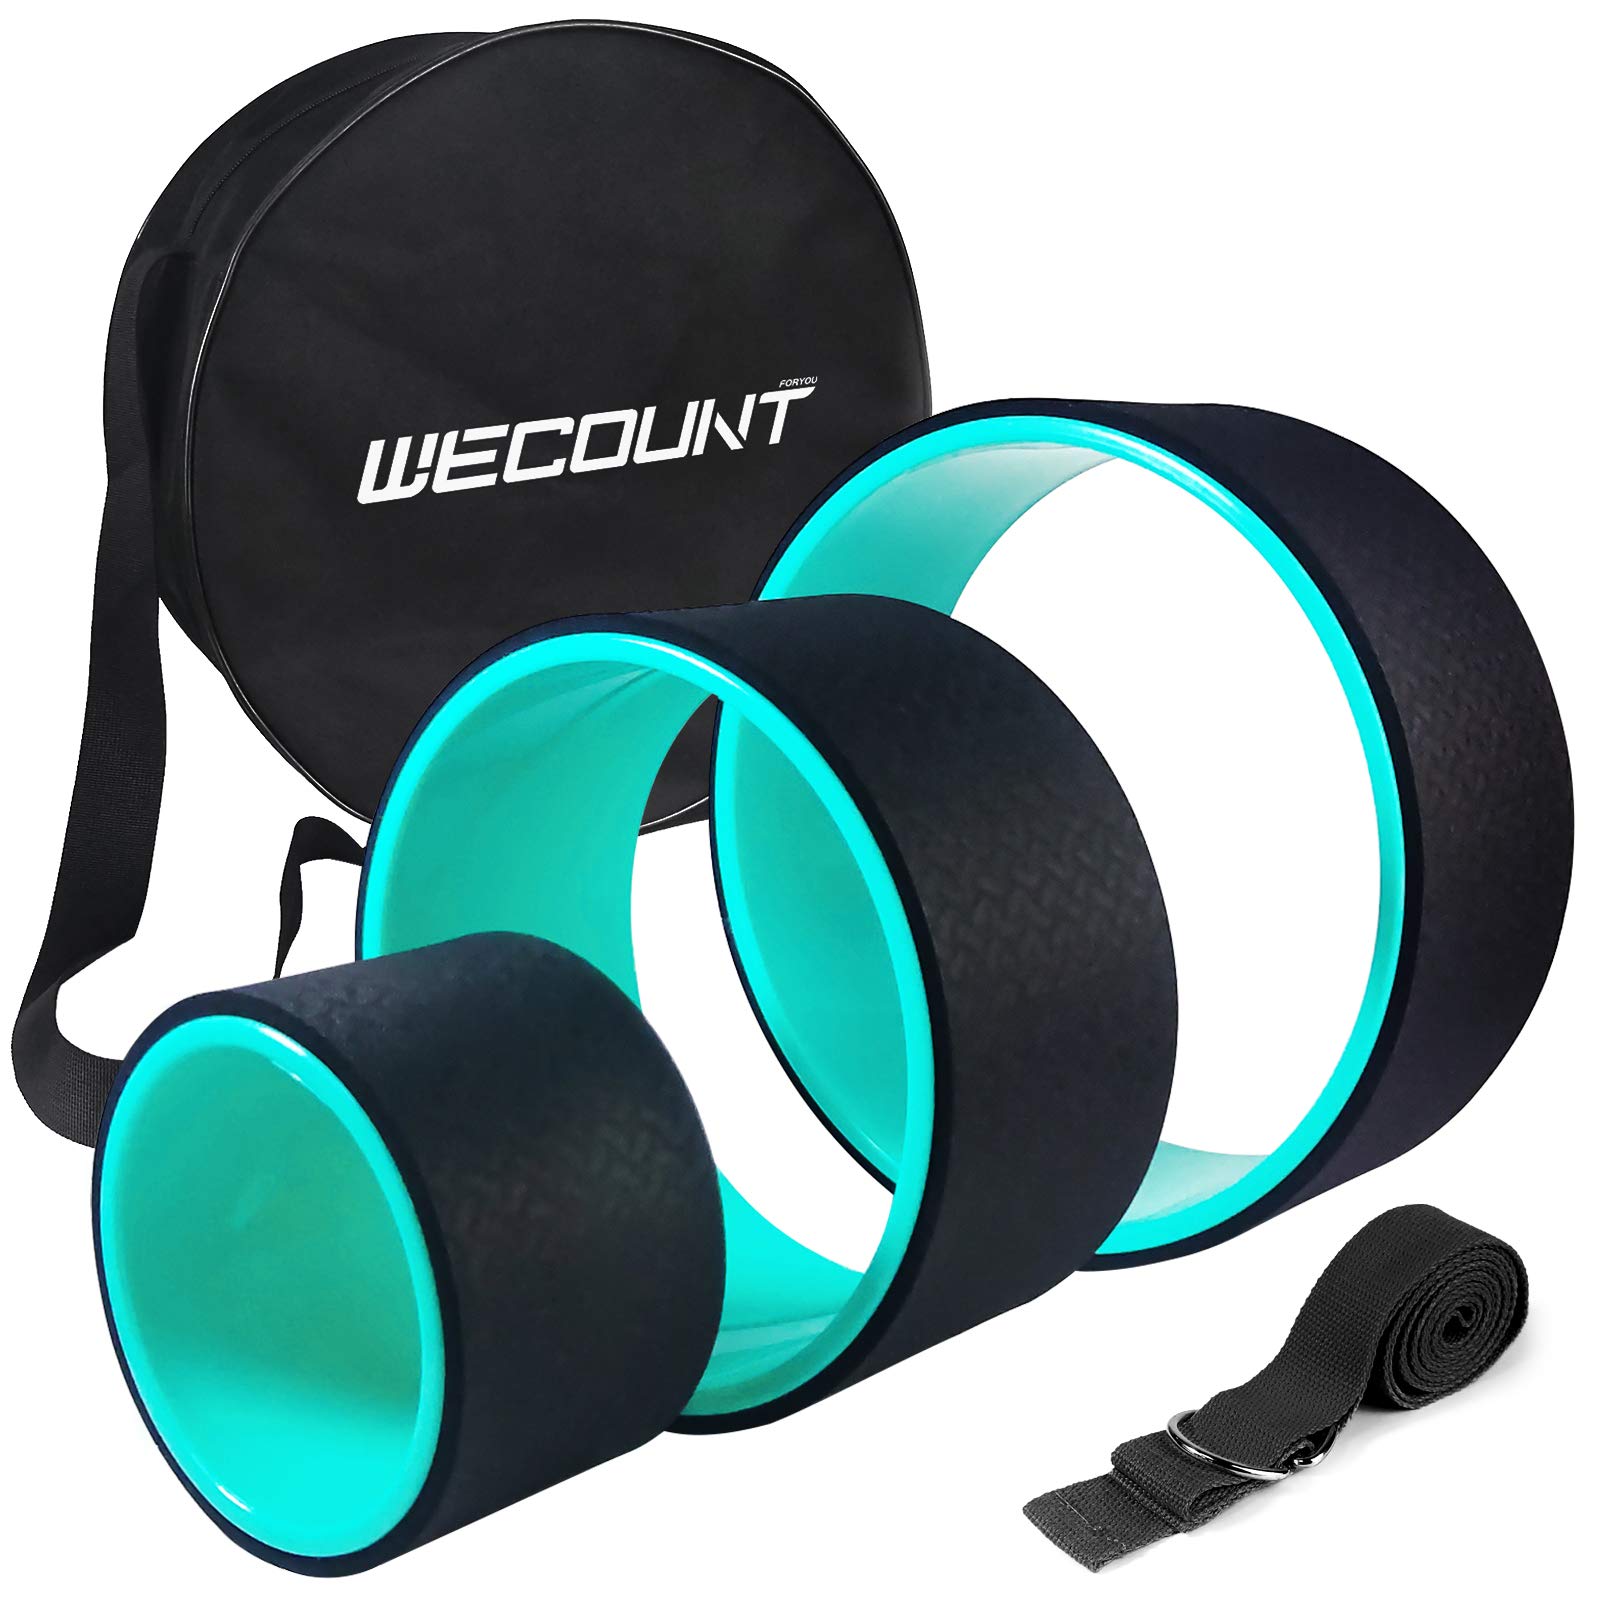 Yoga Wheel 3 Pack, Back Yoga Wheel with Fitness Straps